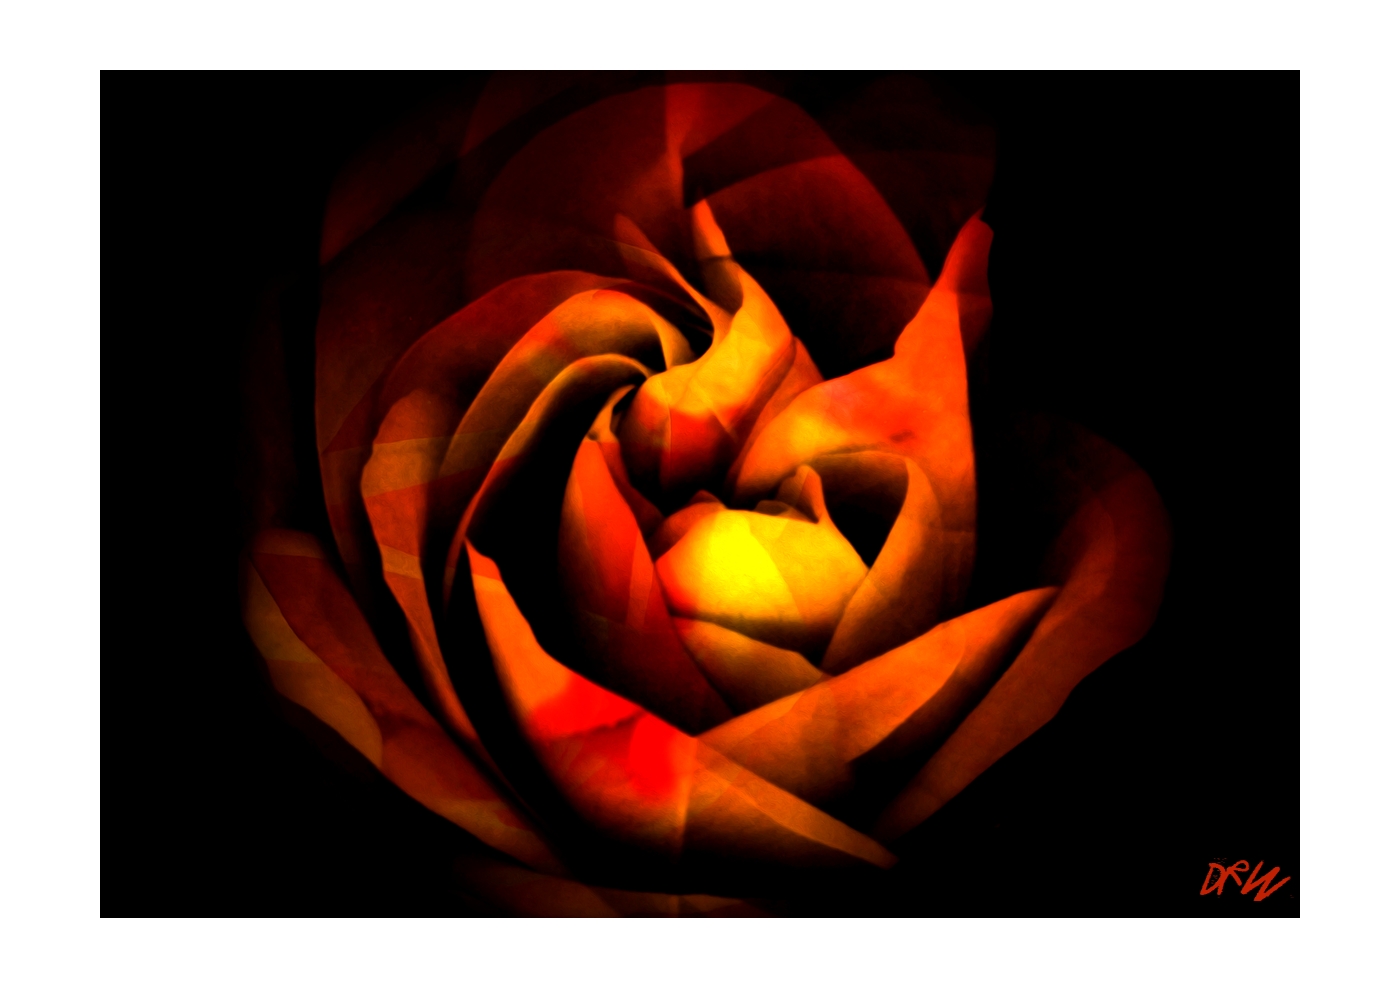 ArtAperture.net - Dar Wolfe - Meditation - Floral - Showcase of floral beauty achieved through a selective fusion of reality and art